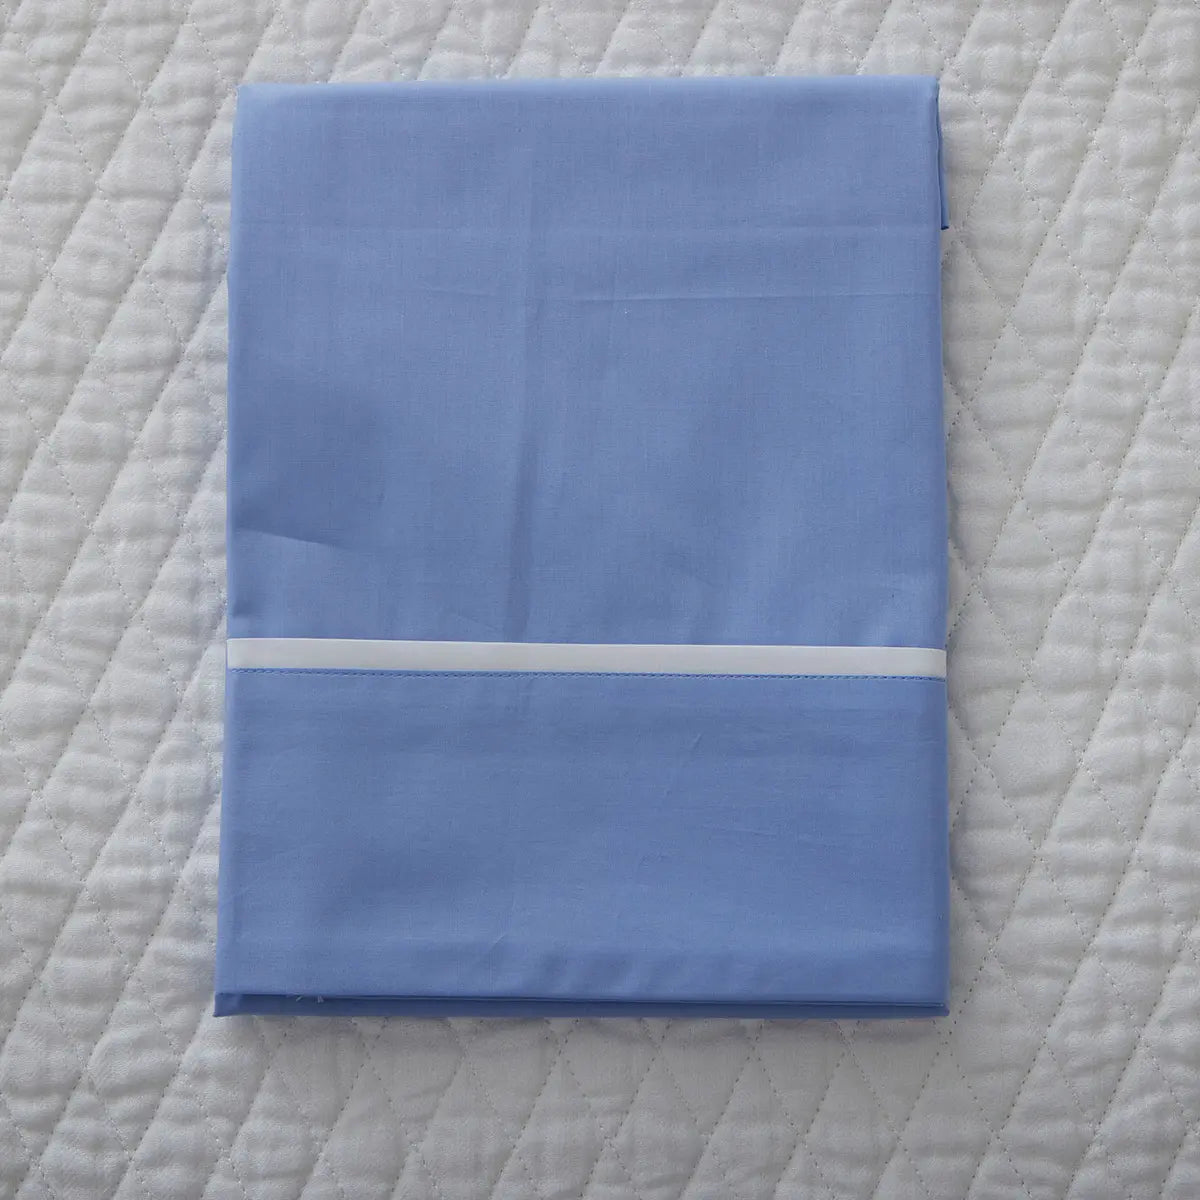 Gracious Home Bali Flat Sheet and Pillowcase - "In Your Eyes" Blue